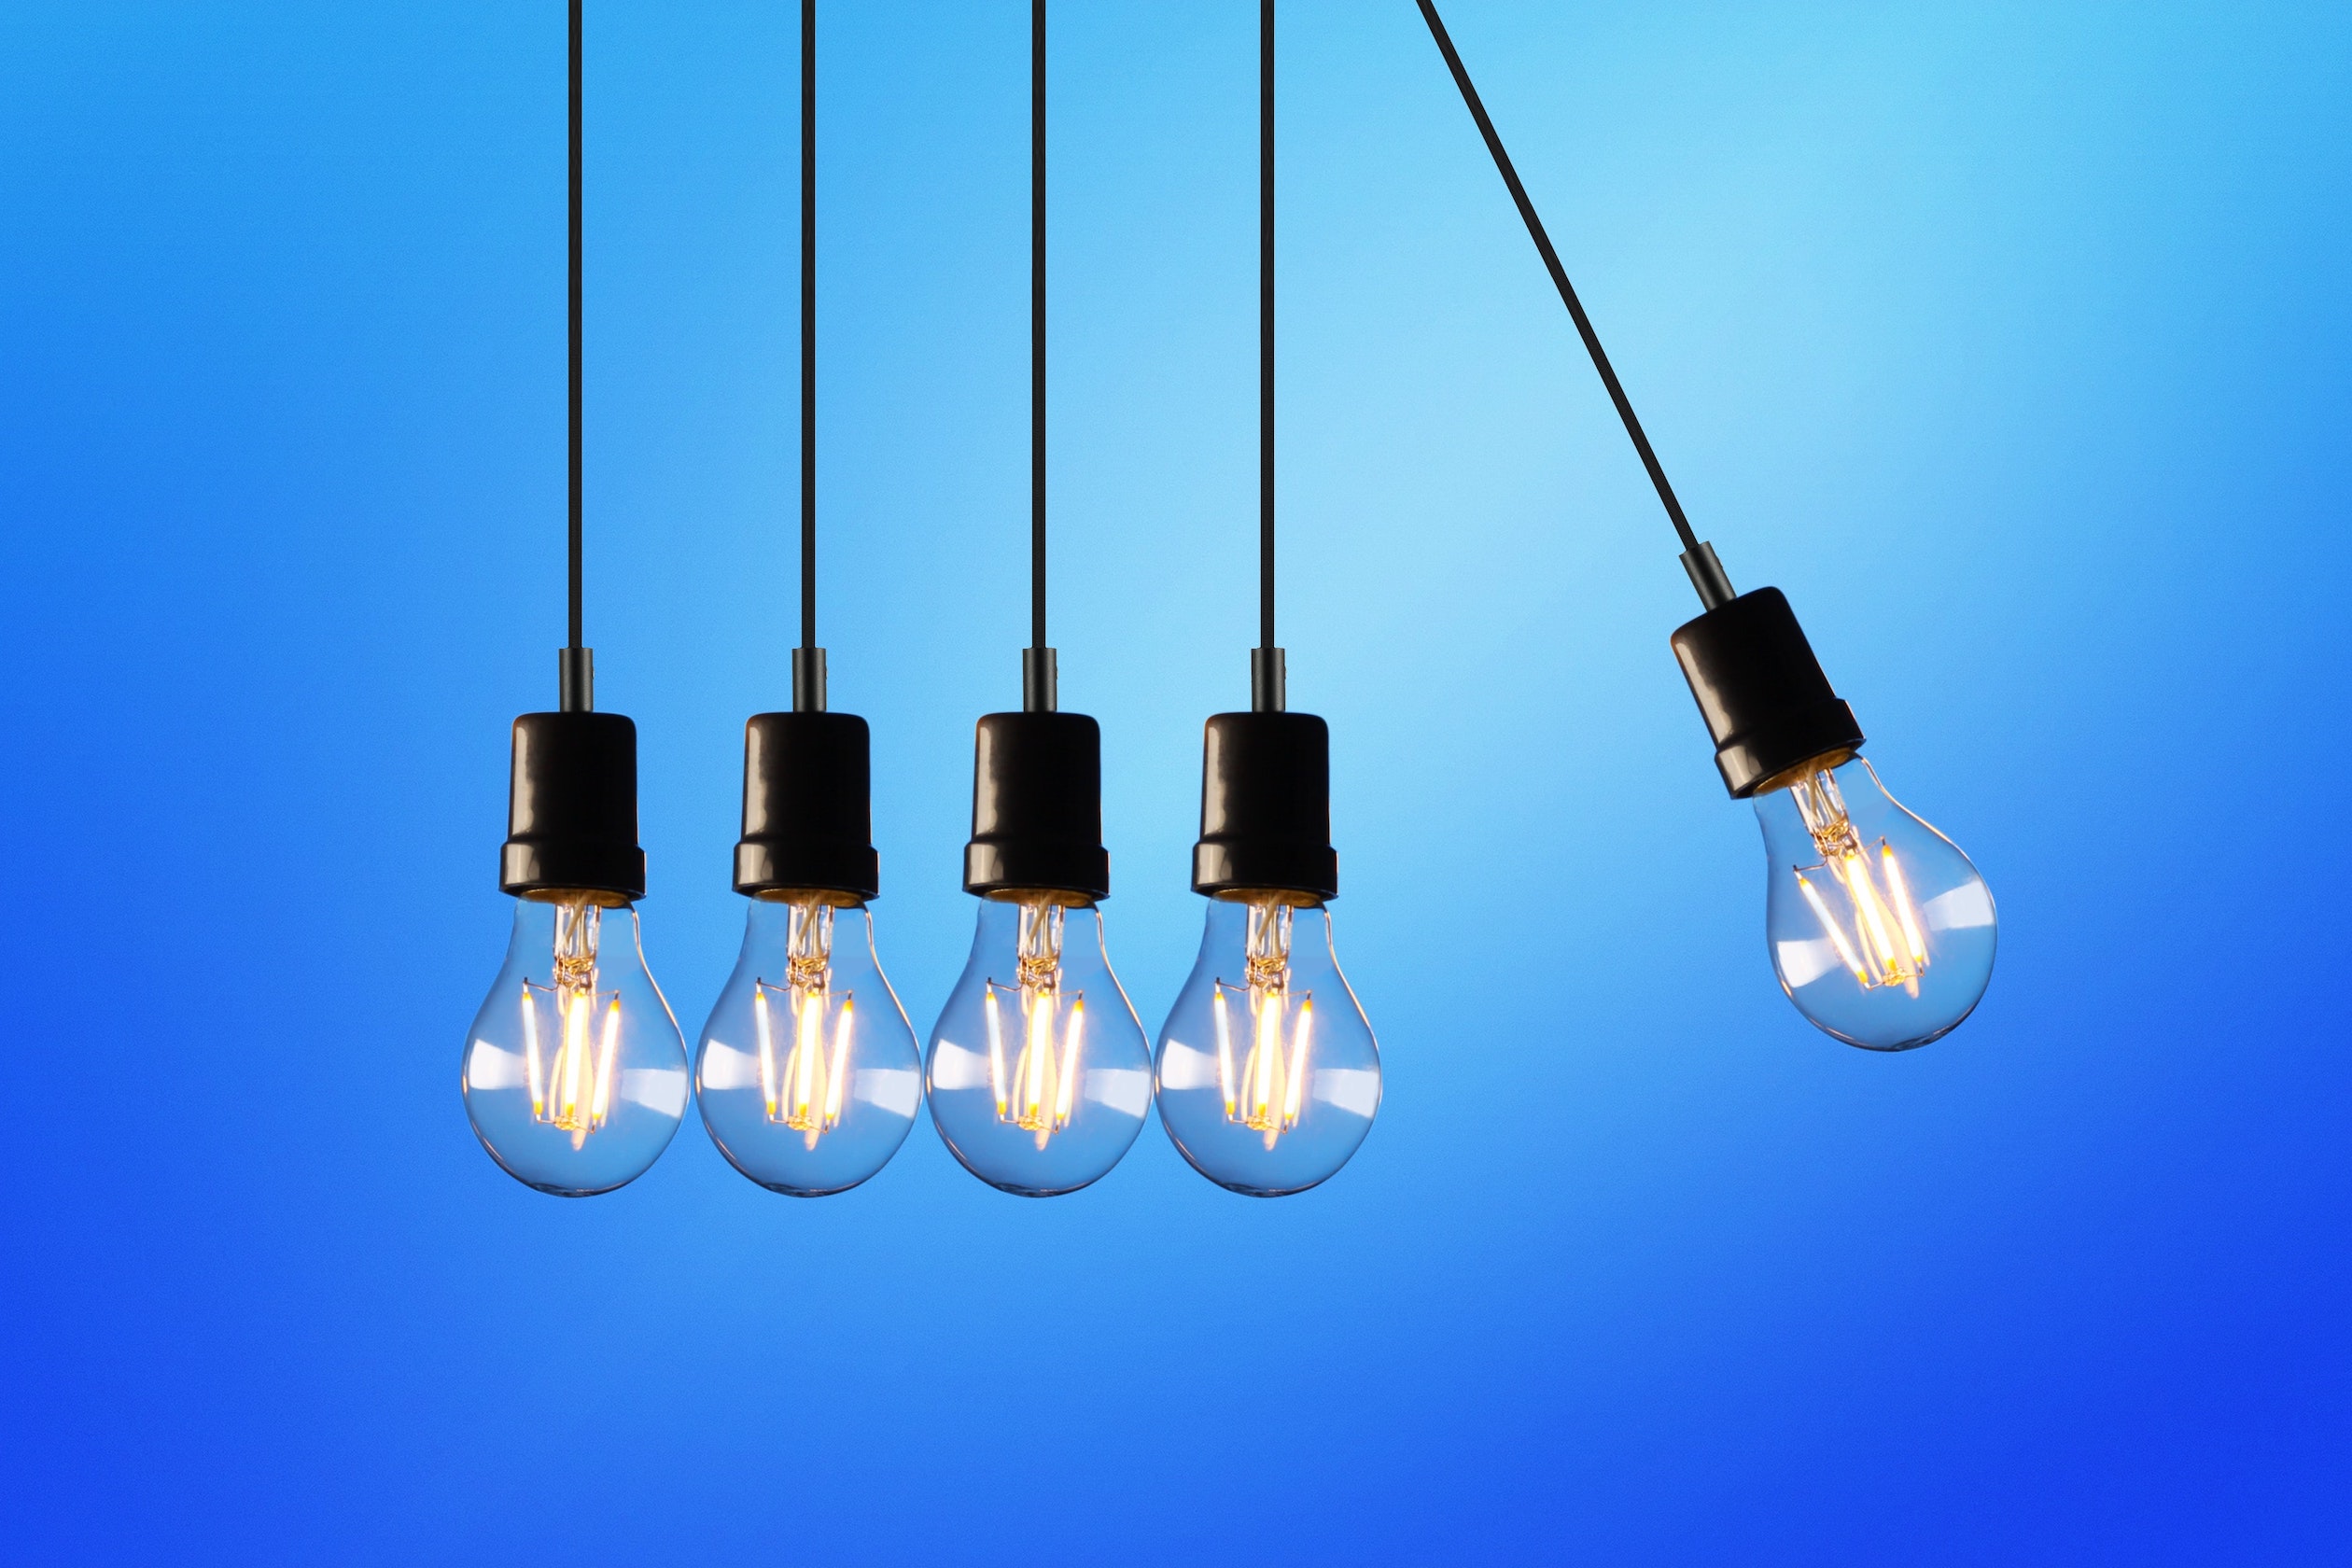 five bare lightbulbs with one swinging towards the other 4 against a blue background